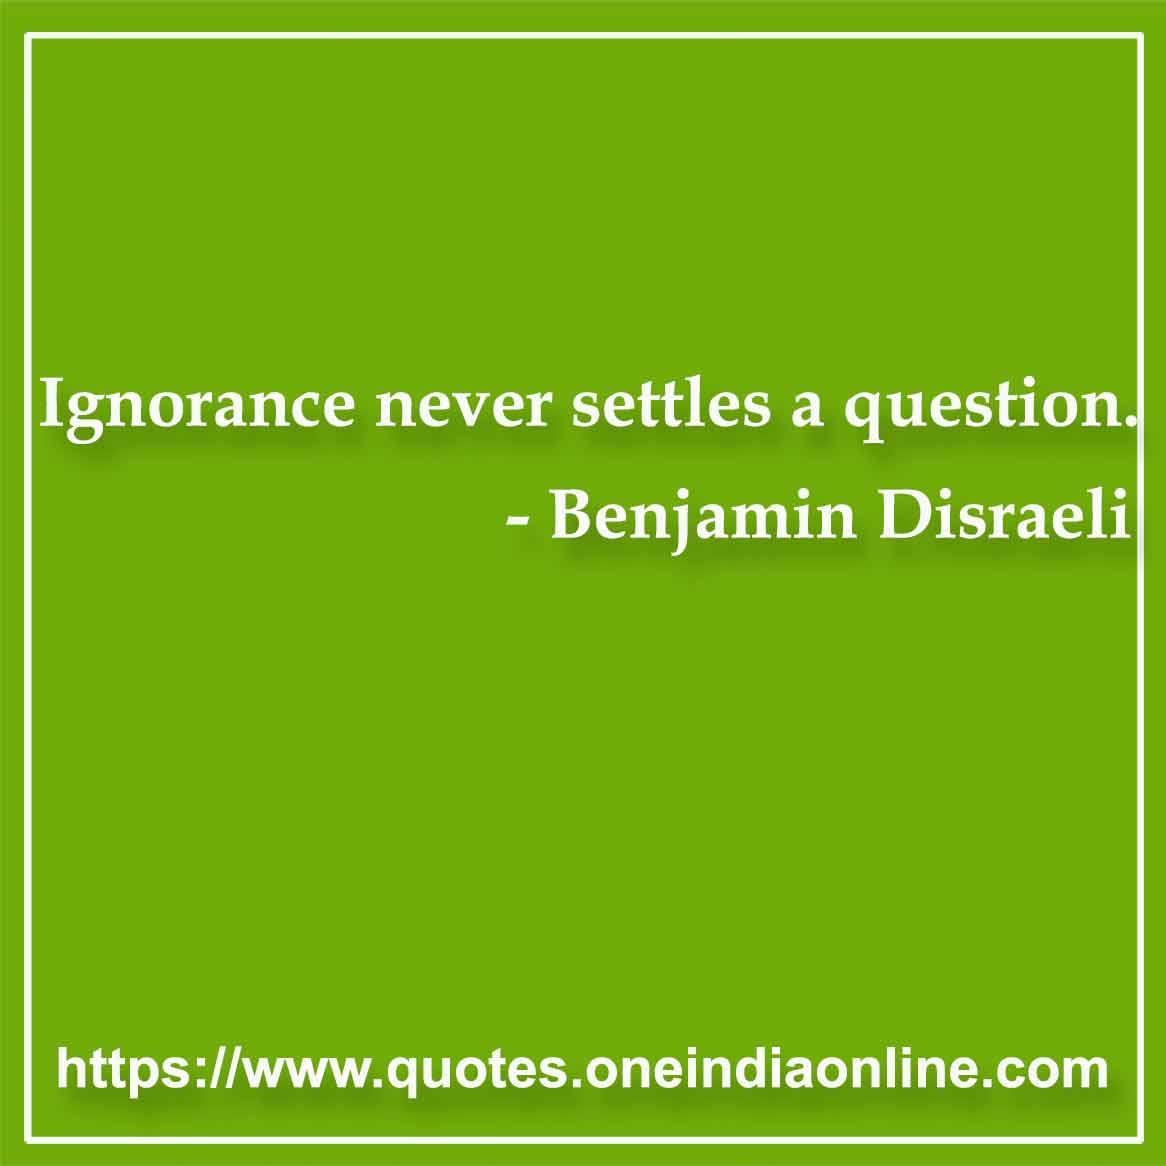 Ignorance never settles a question.

- Ignorance Quotes by Benjamin Disraeli